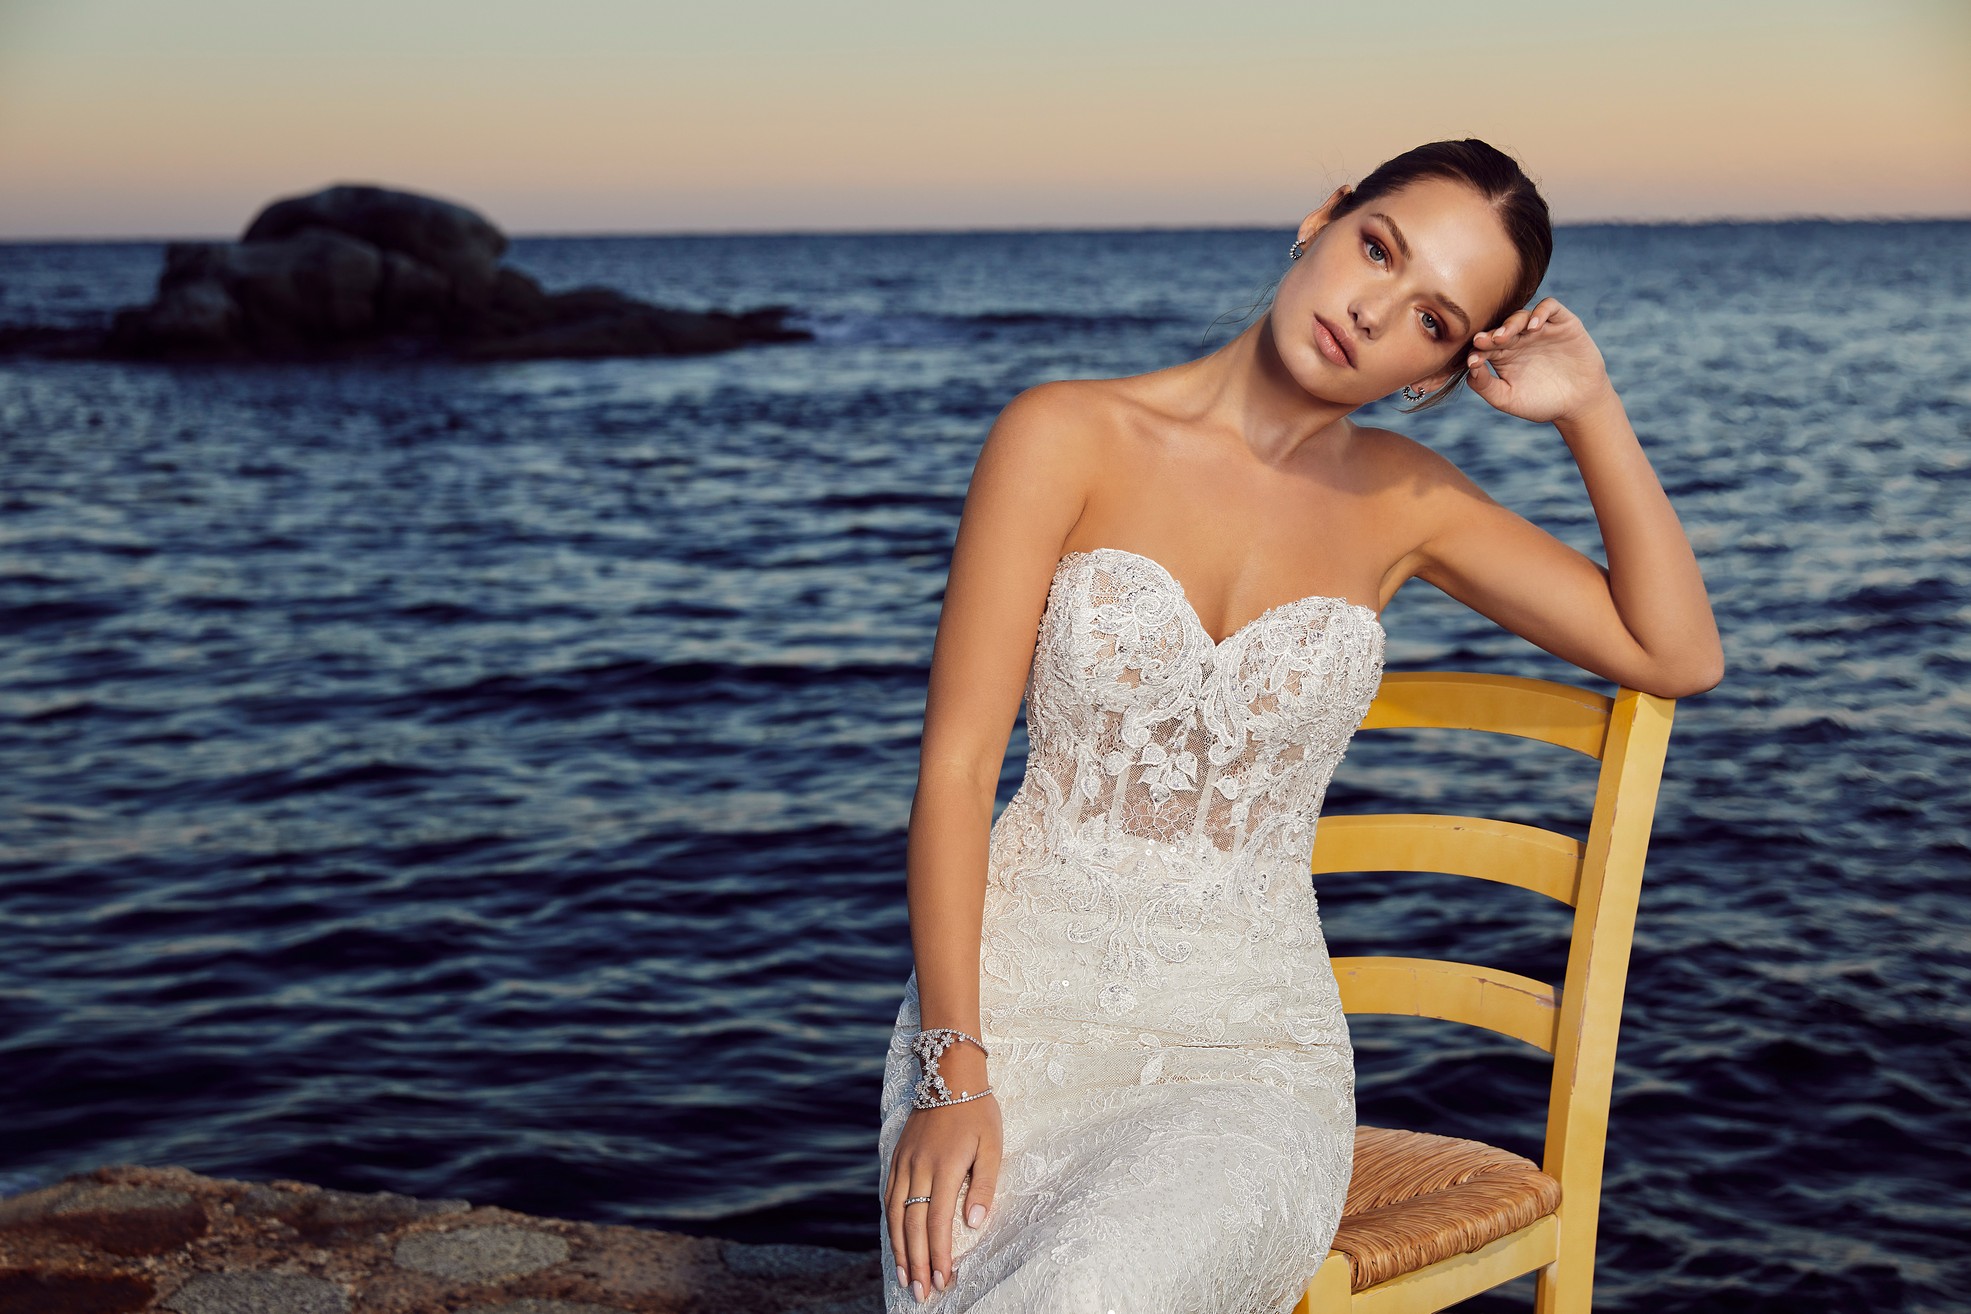 Woman sat on wooden chair next to the sea wearing strapless lace wedding gown with sweetheart neckline